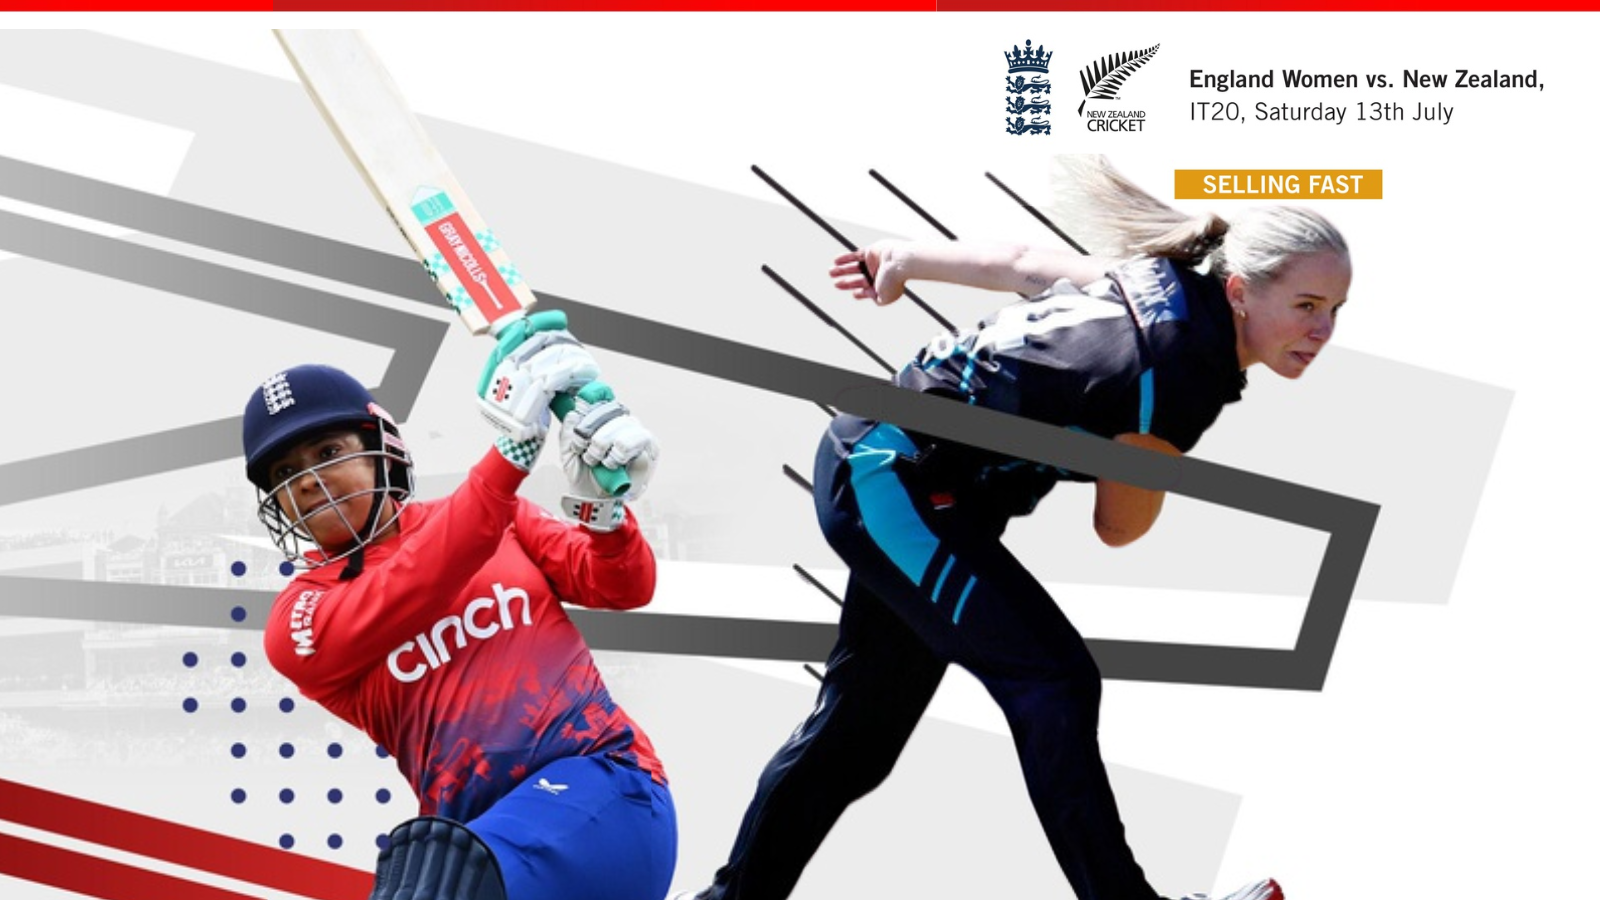 Group Booking Discounts: England Women take on New Zealand in an International T20 at The Kia Oval